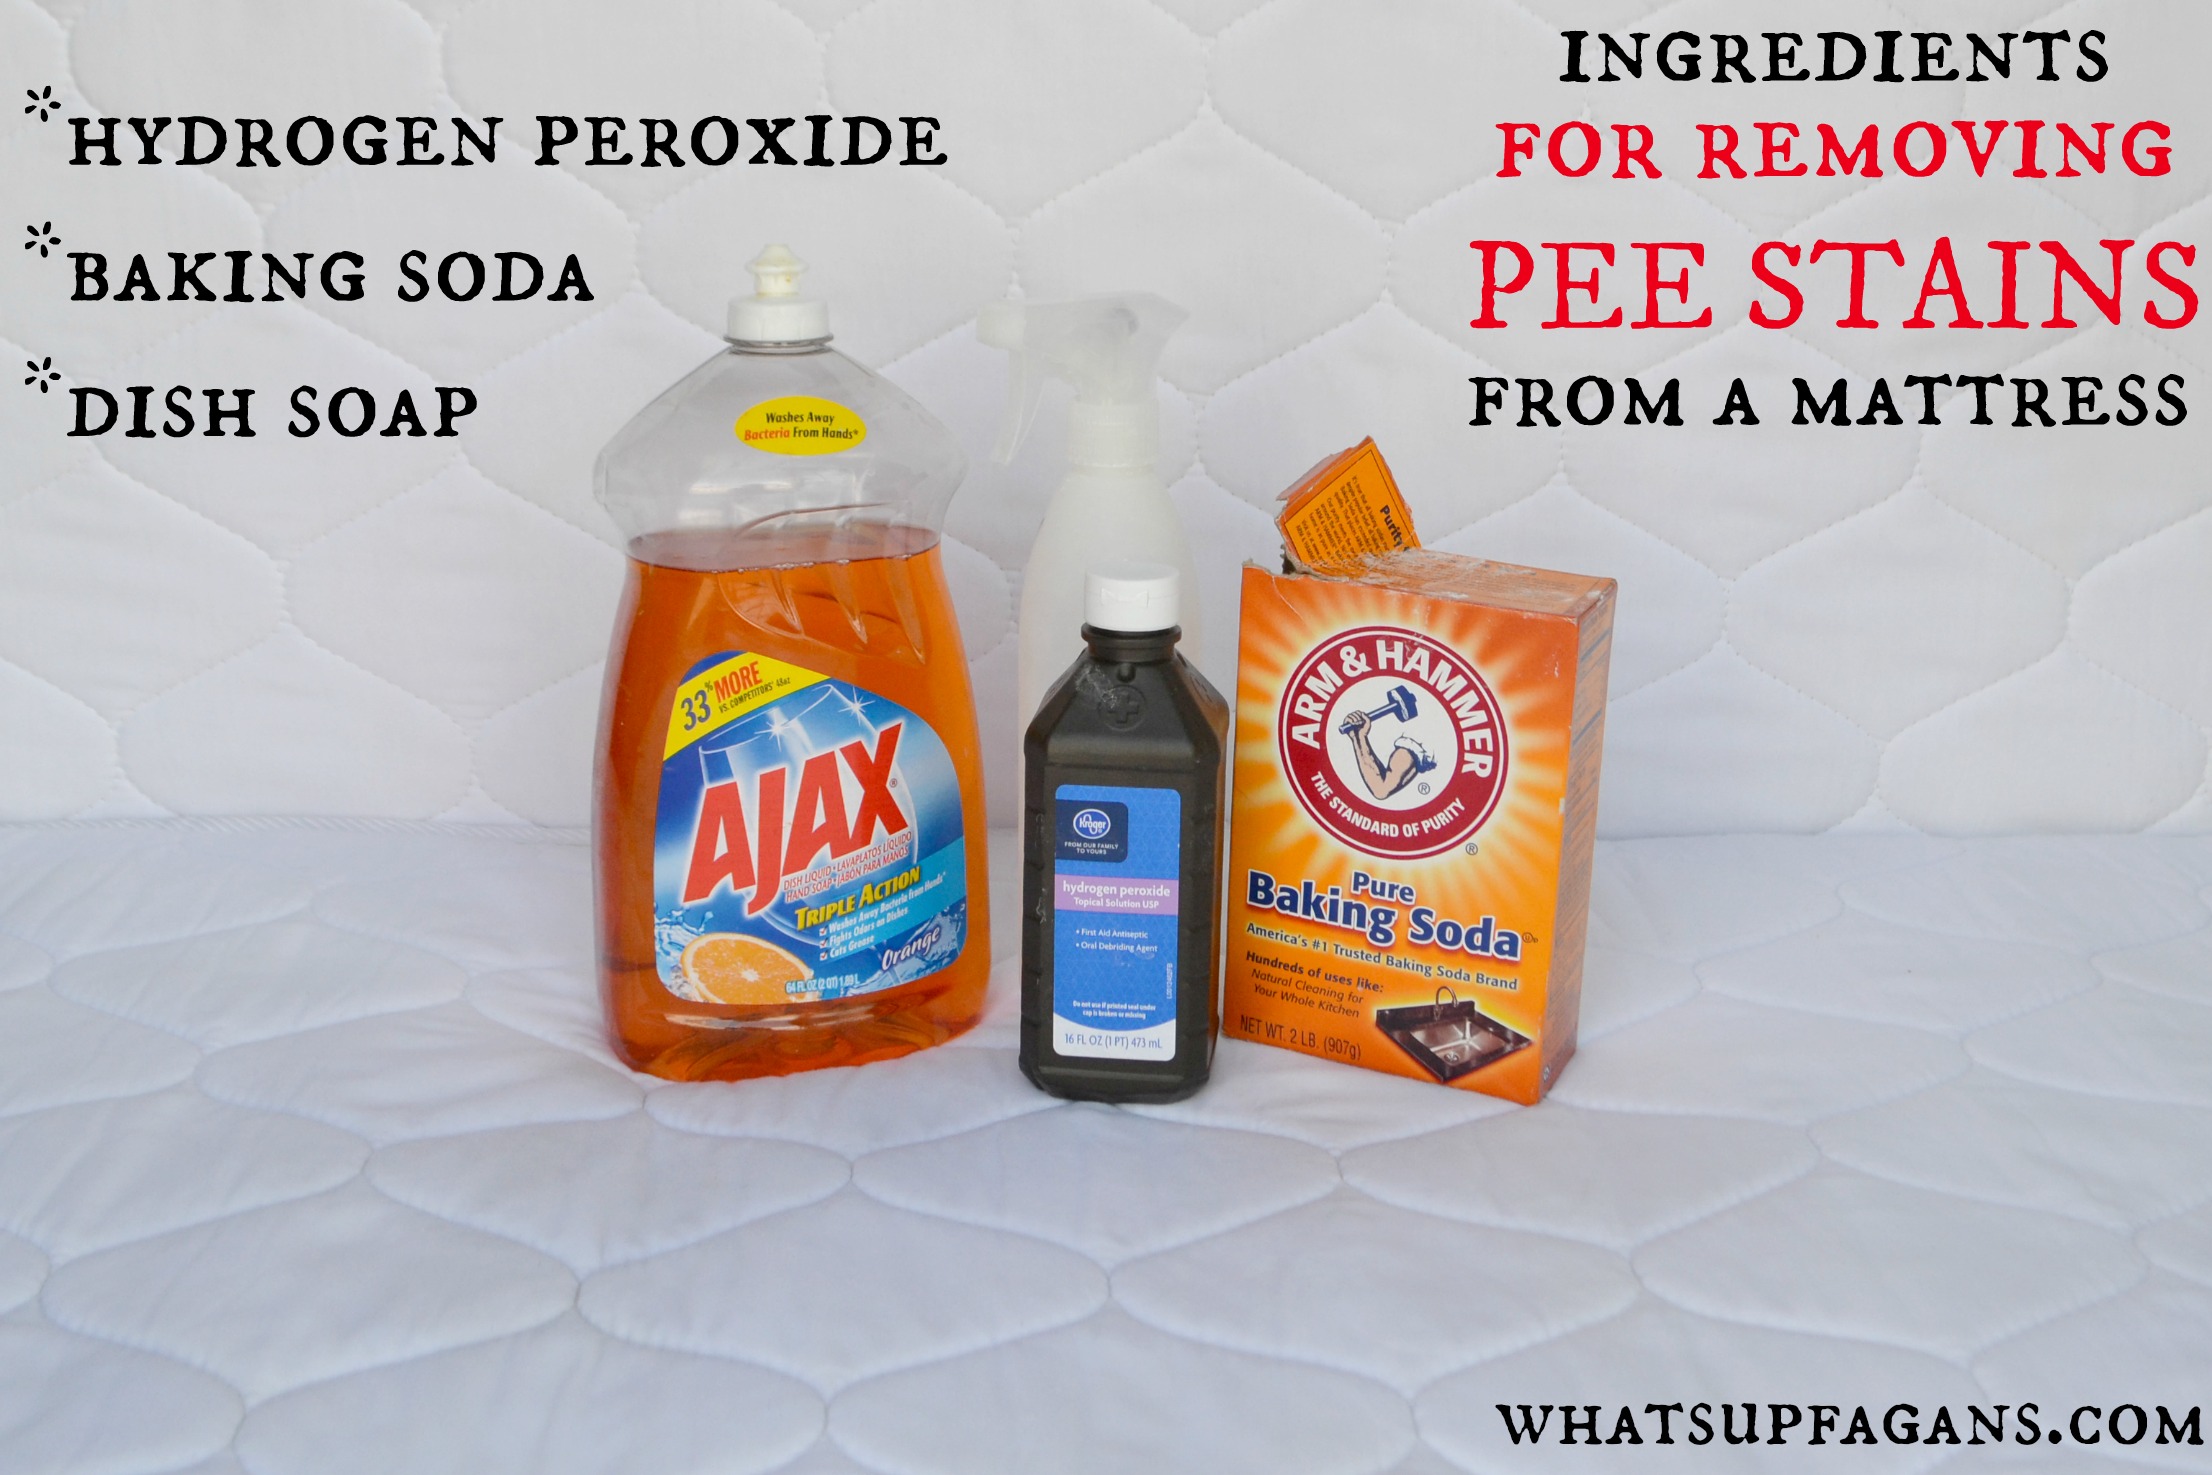 How to Easily Remove Old Pee Stain and Smell from a Mattress